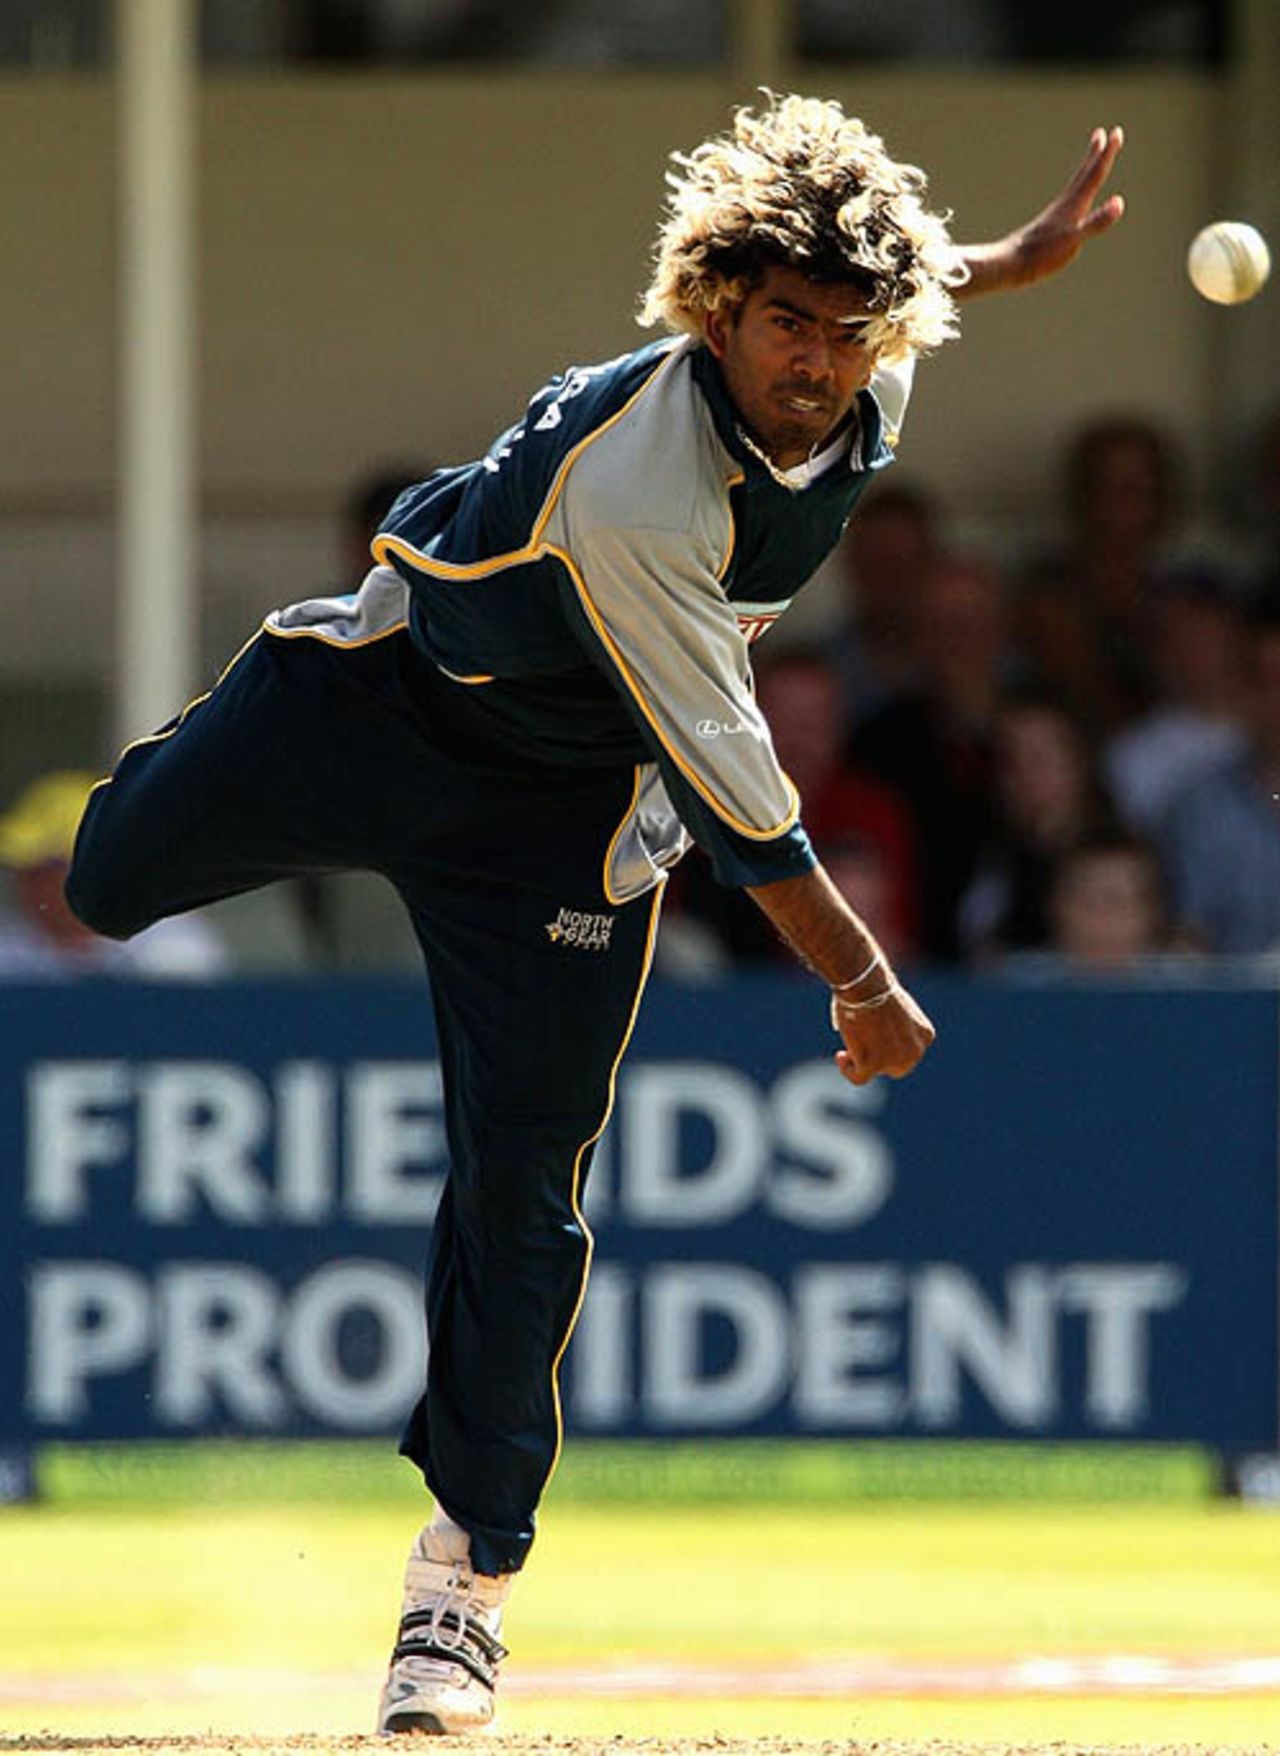 Lasith Malinga picked up three wickets as Sussex were bowled out for 140, Kent v Sussex, Twenty20 Cup, 2nd semi-final, Edgbaston, August 4, 2007